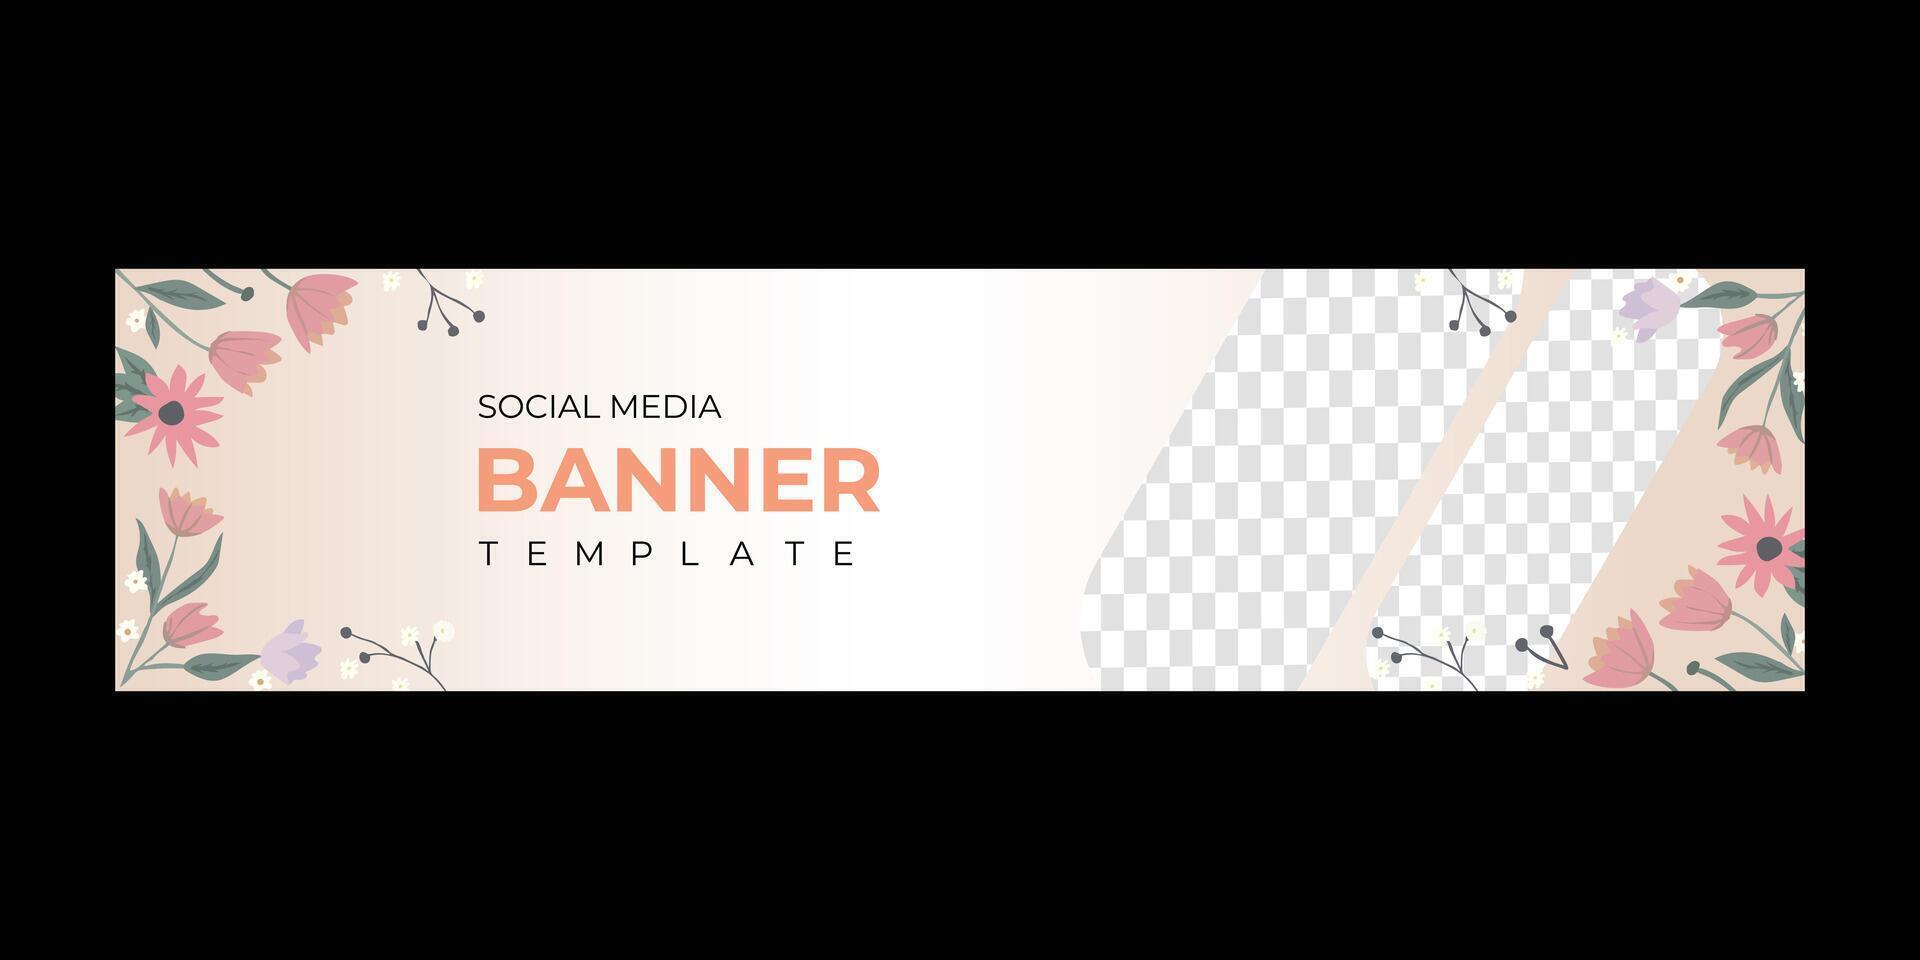 Social media cover banner design with blank image section vector